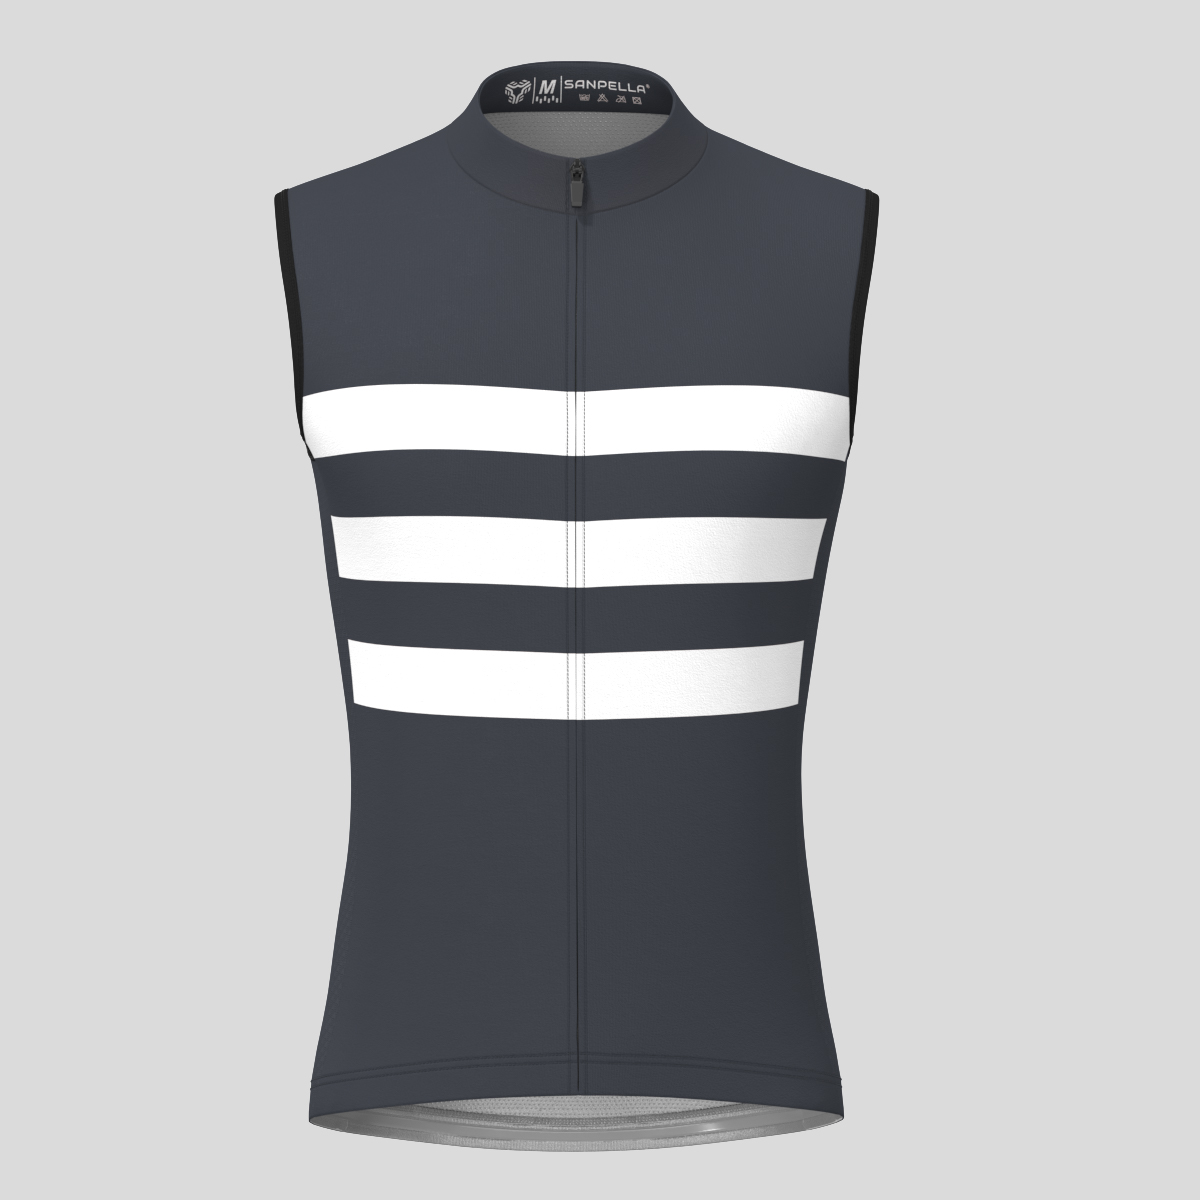 Men's Classic Stripes Sleeveless Cycling Jersey - Graphite